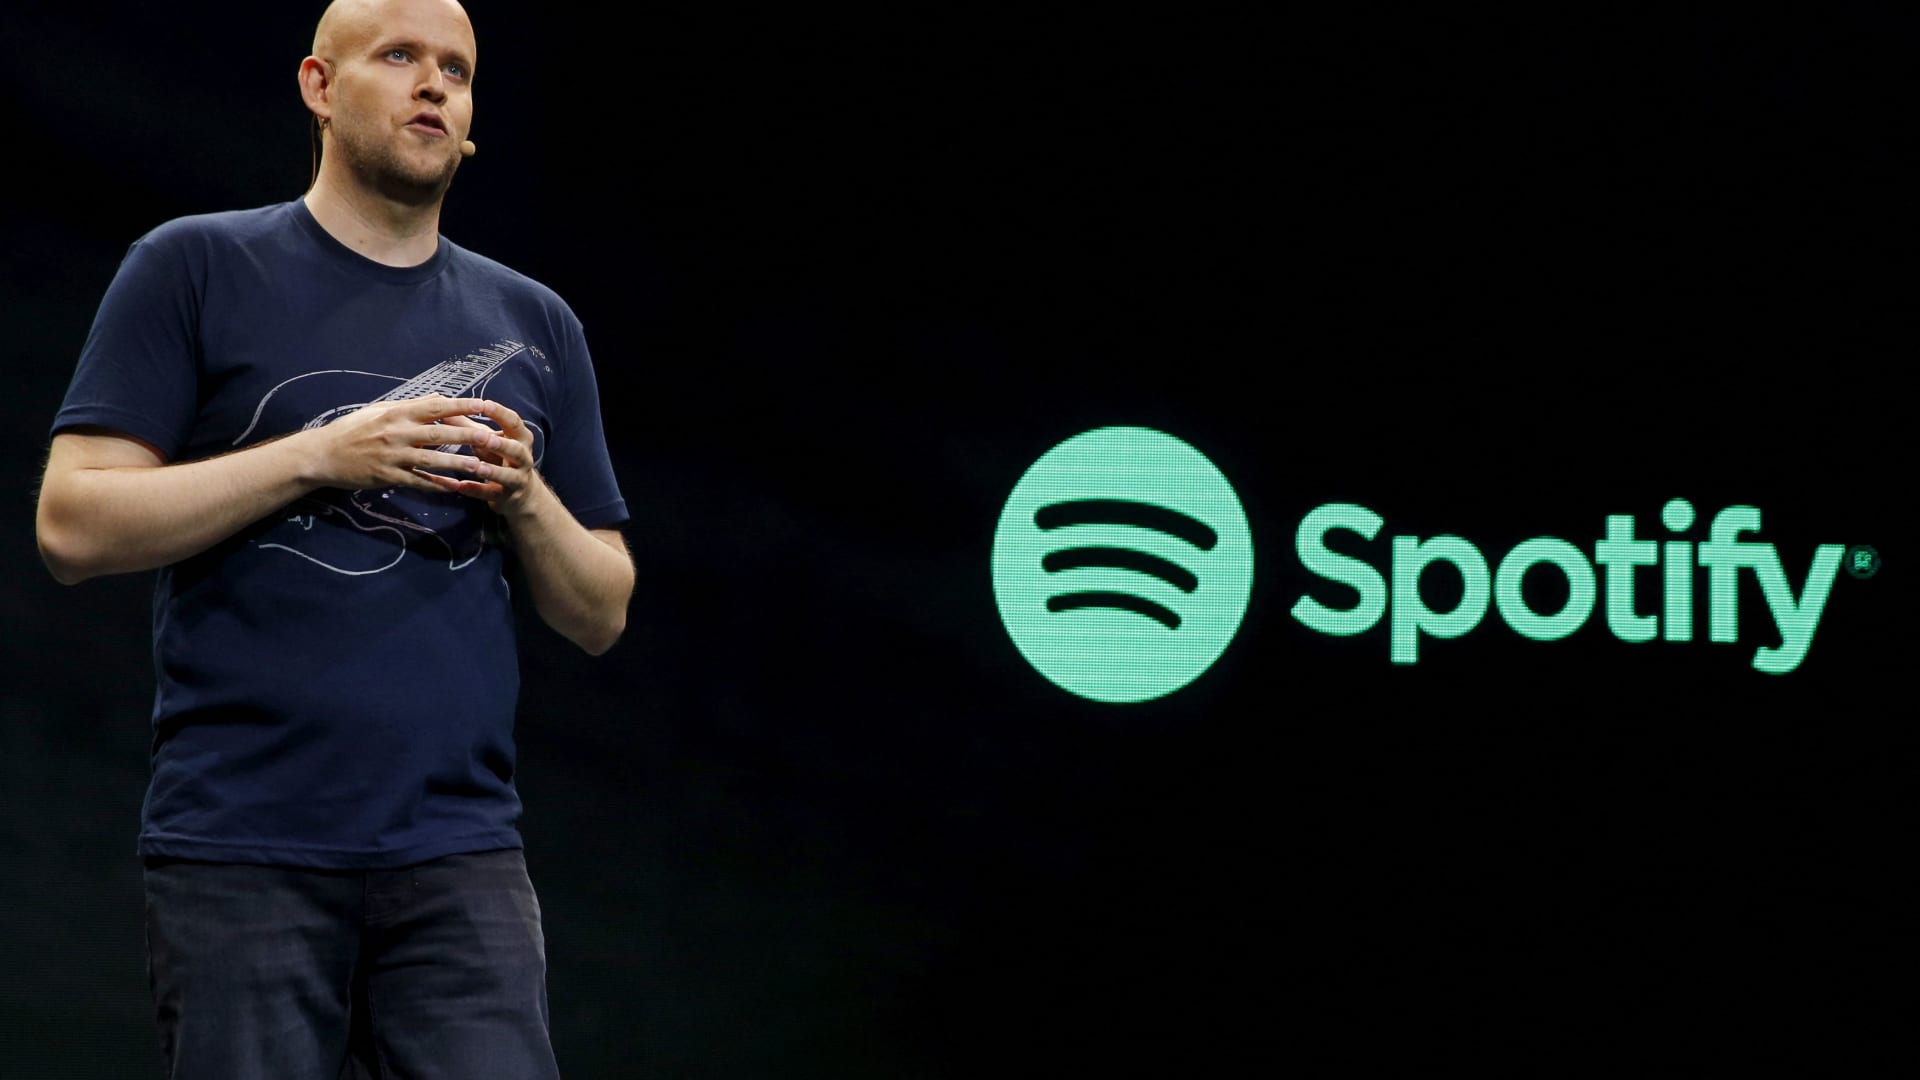 Tech stocks to buy like Apple and Spotify